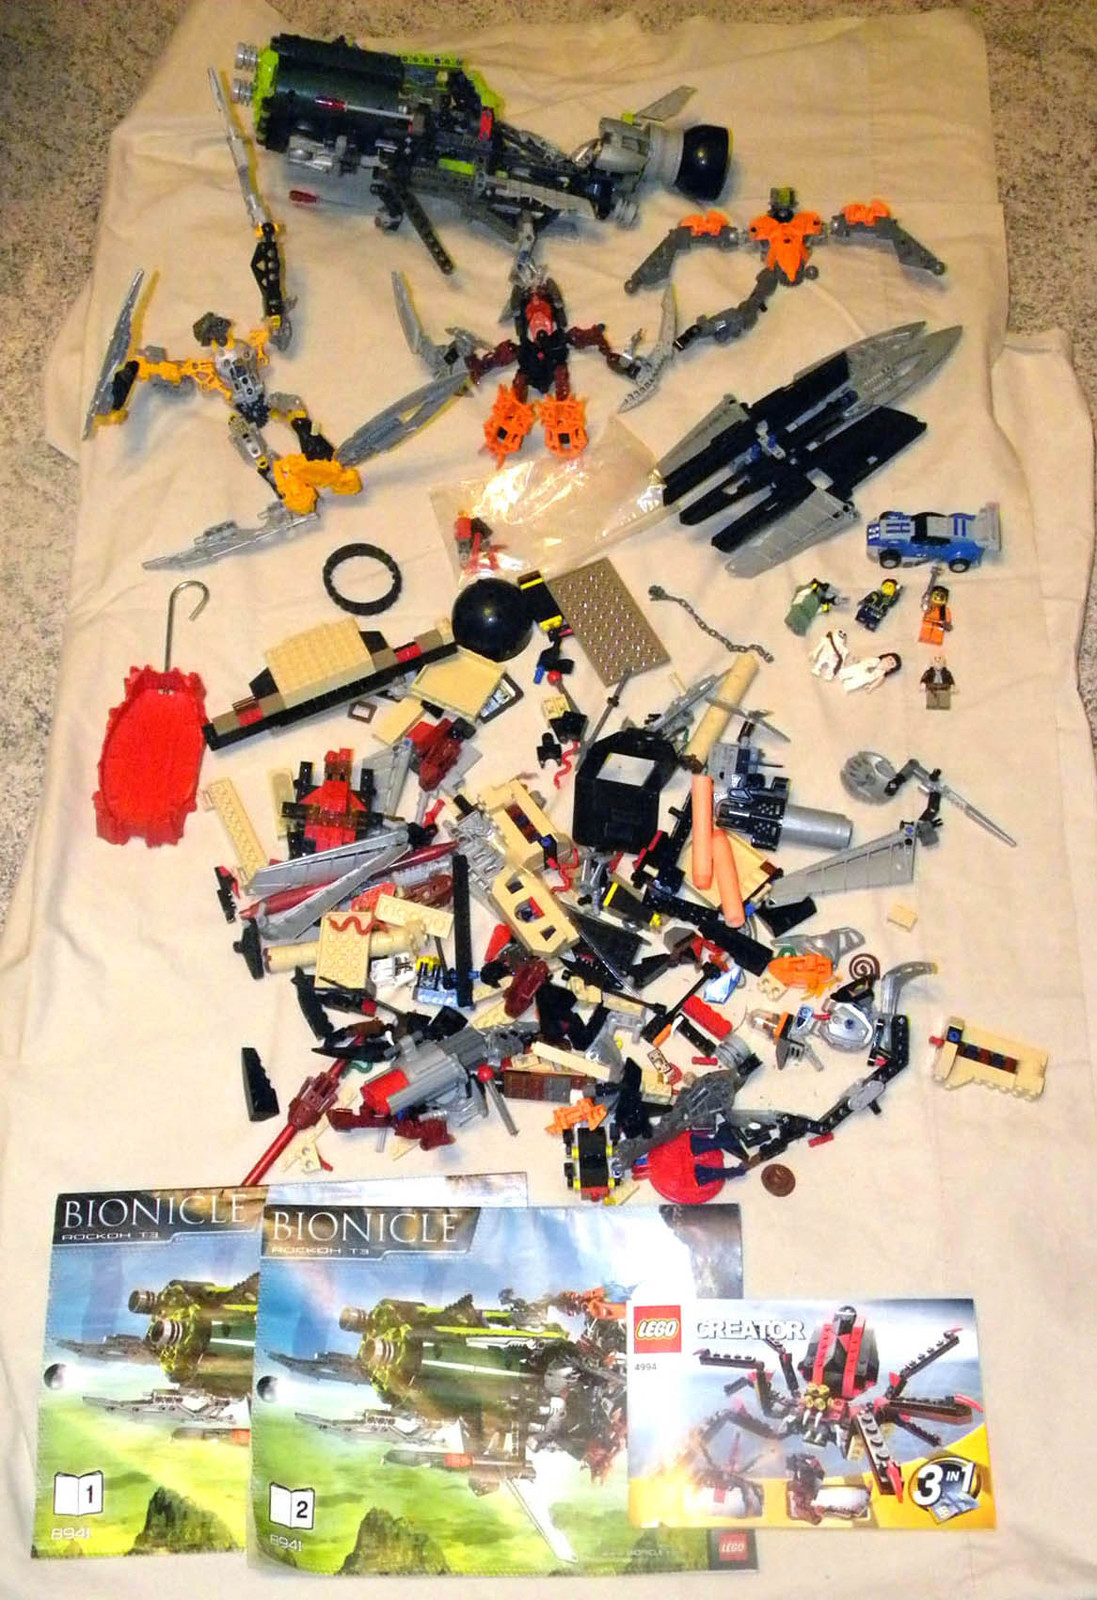 Lego Bionicle Lot of toy figures  parts may or may not be complete pieces 7 lbs - $50.00